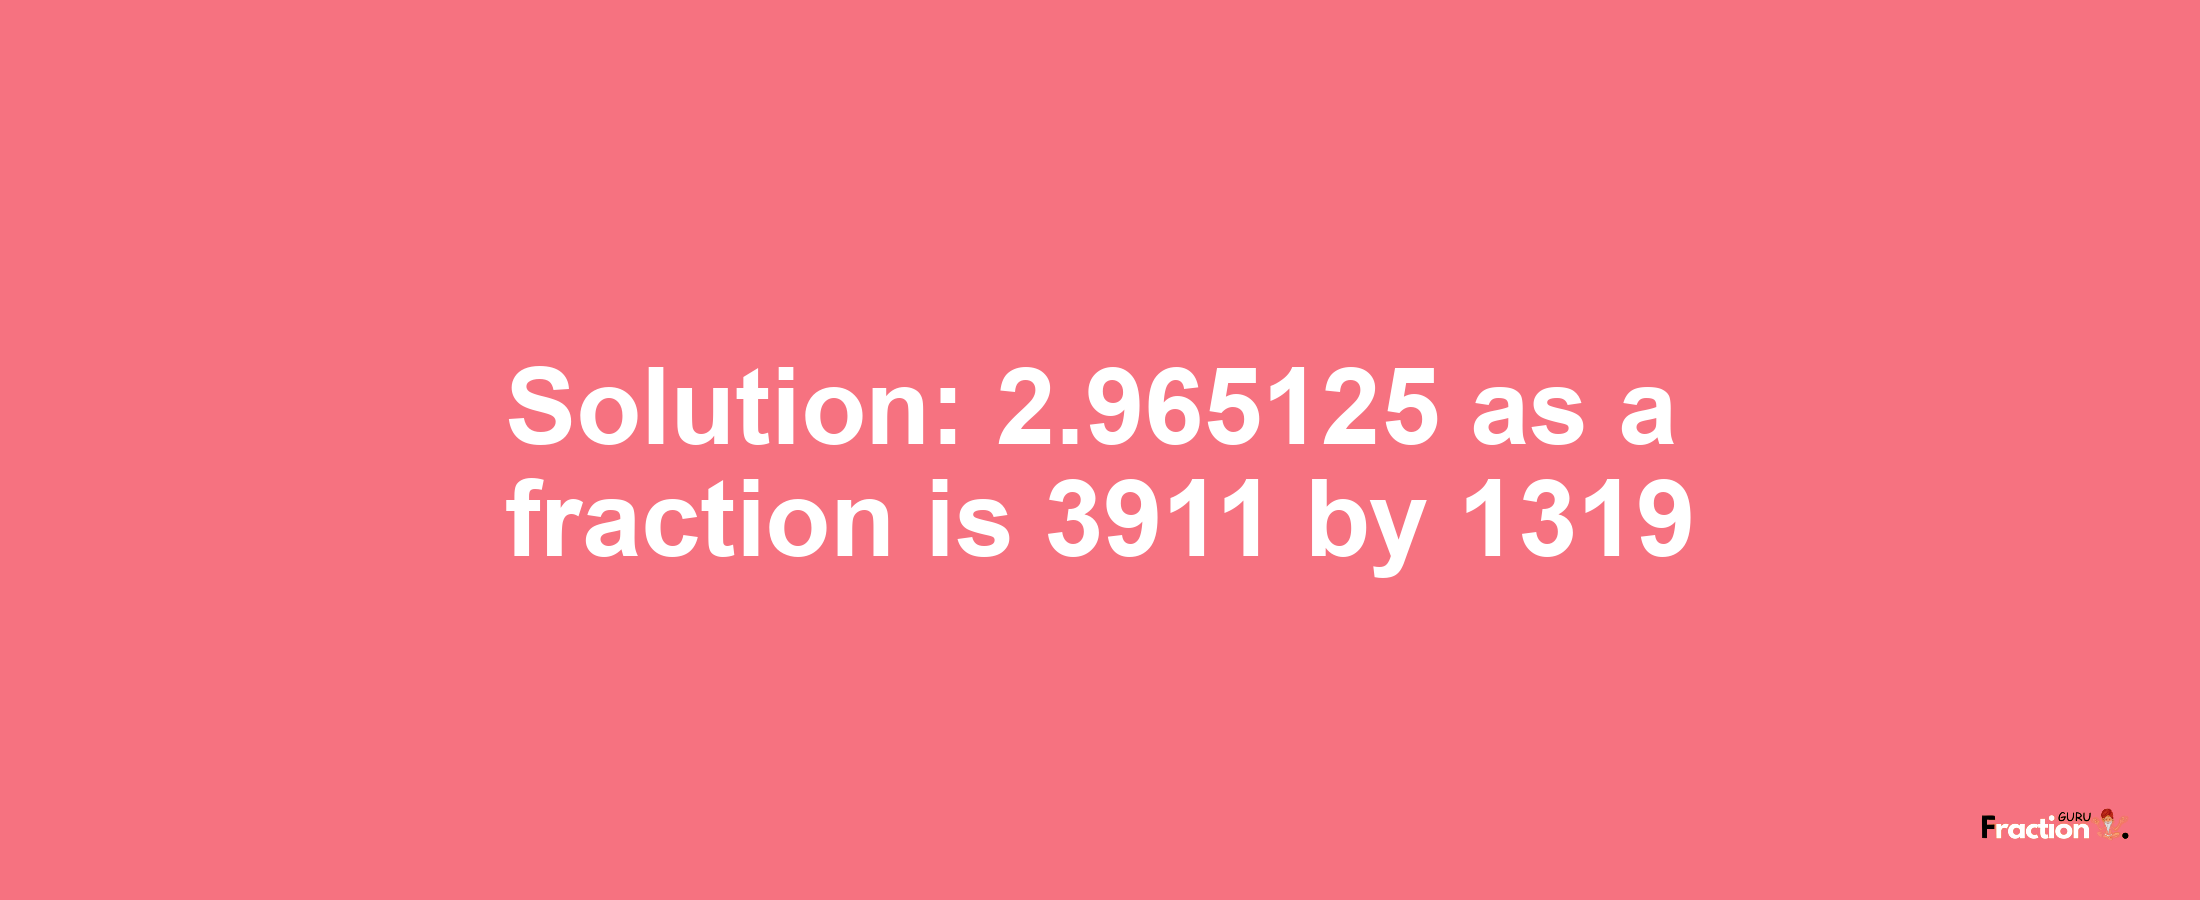 Solution:2.965125 as a fraction is 3911/1319